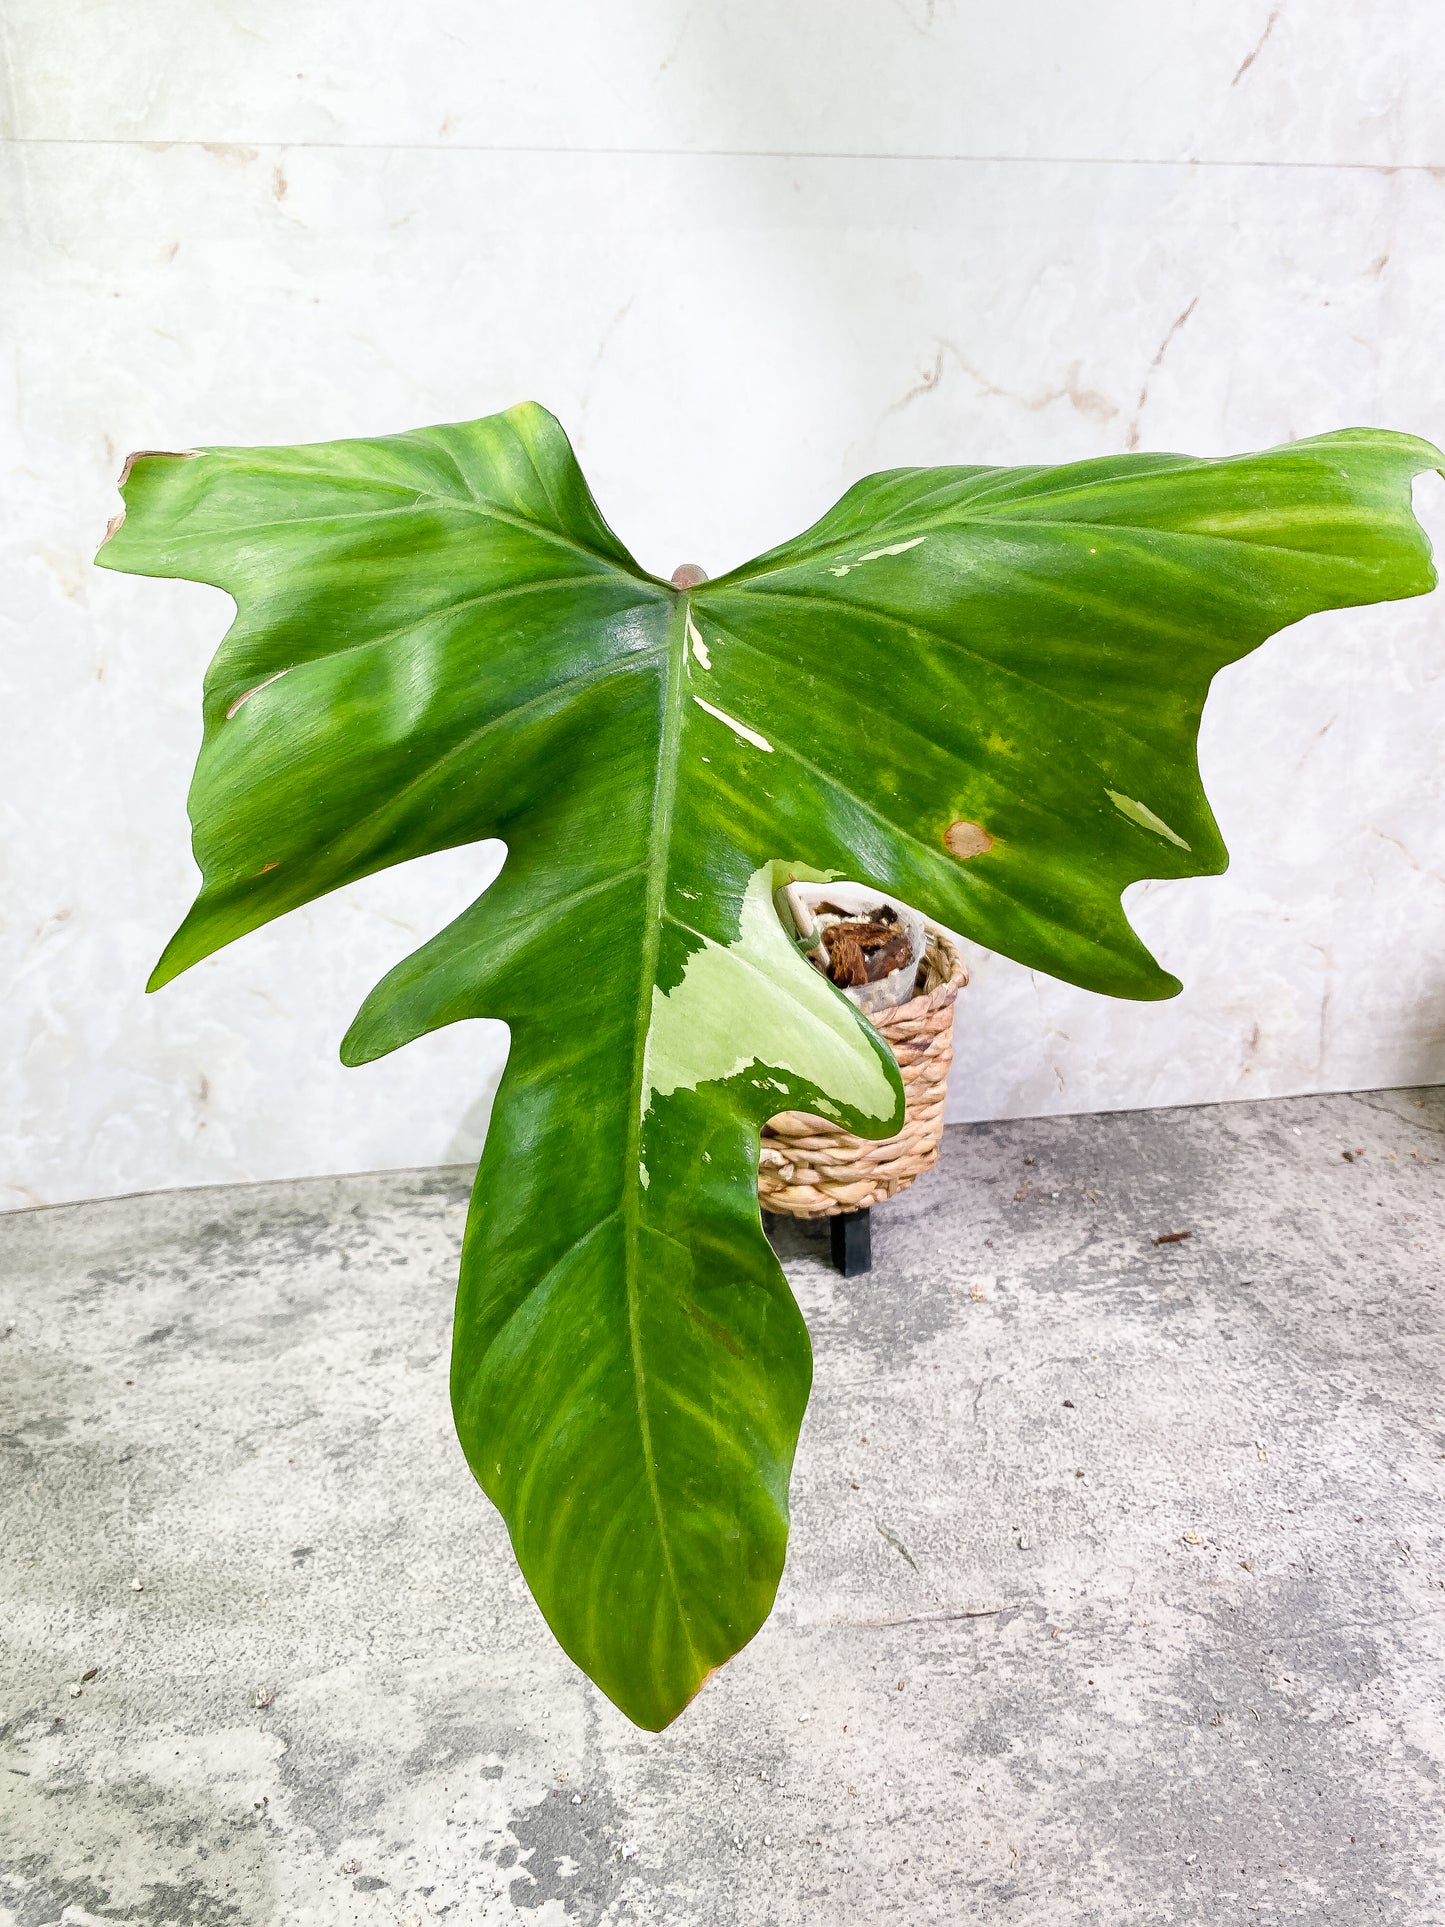 Philodendron Golden Dragon Variegated 1 leaf (13.5" long) 1 new highly Variegated leaf is unfurling 1 tc sprout 1 extra bud Rooted